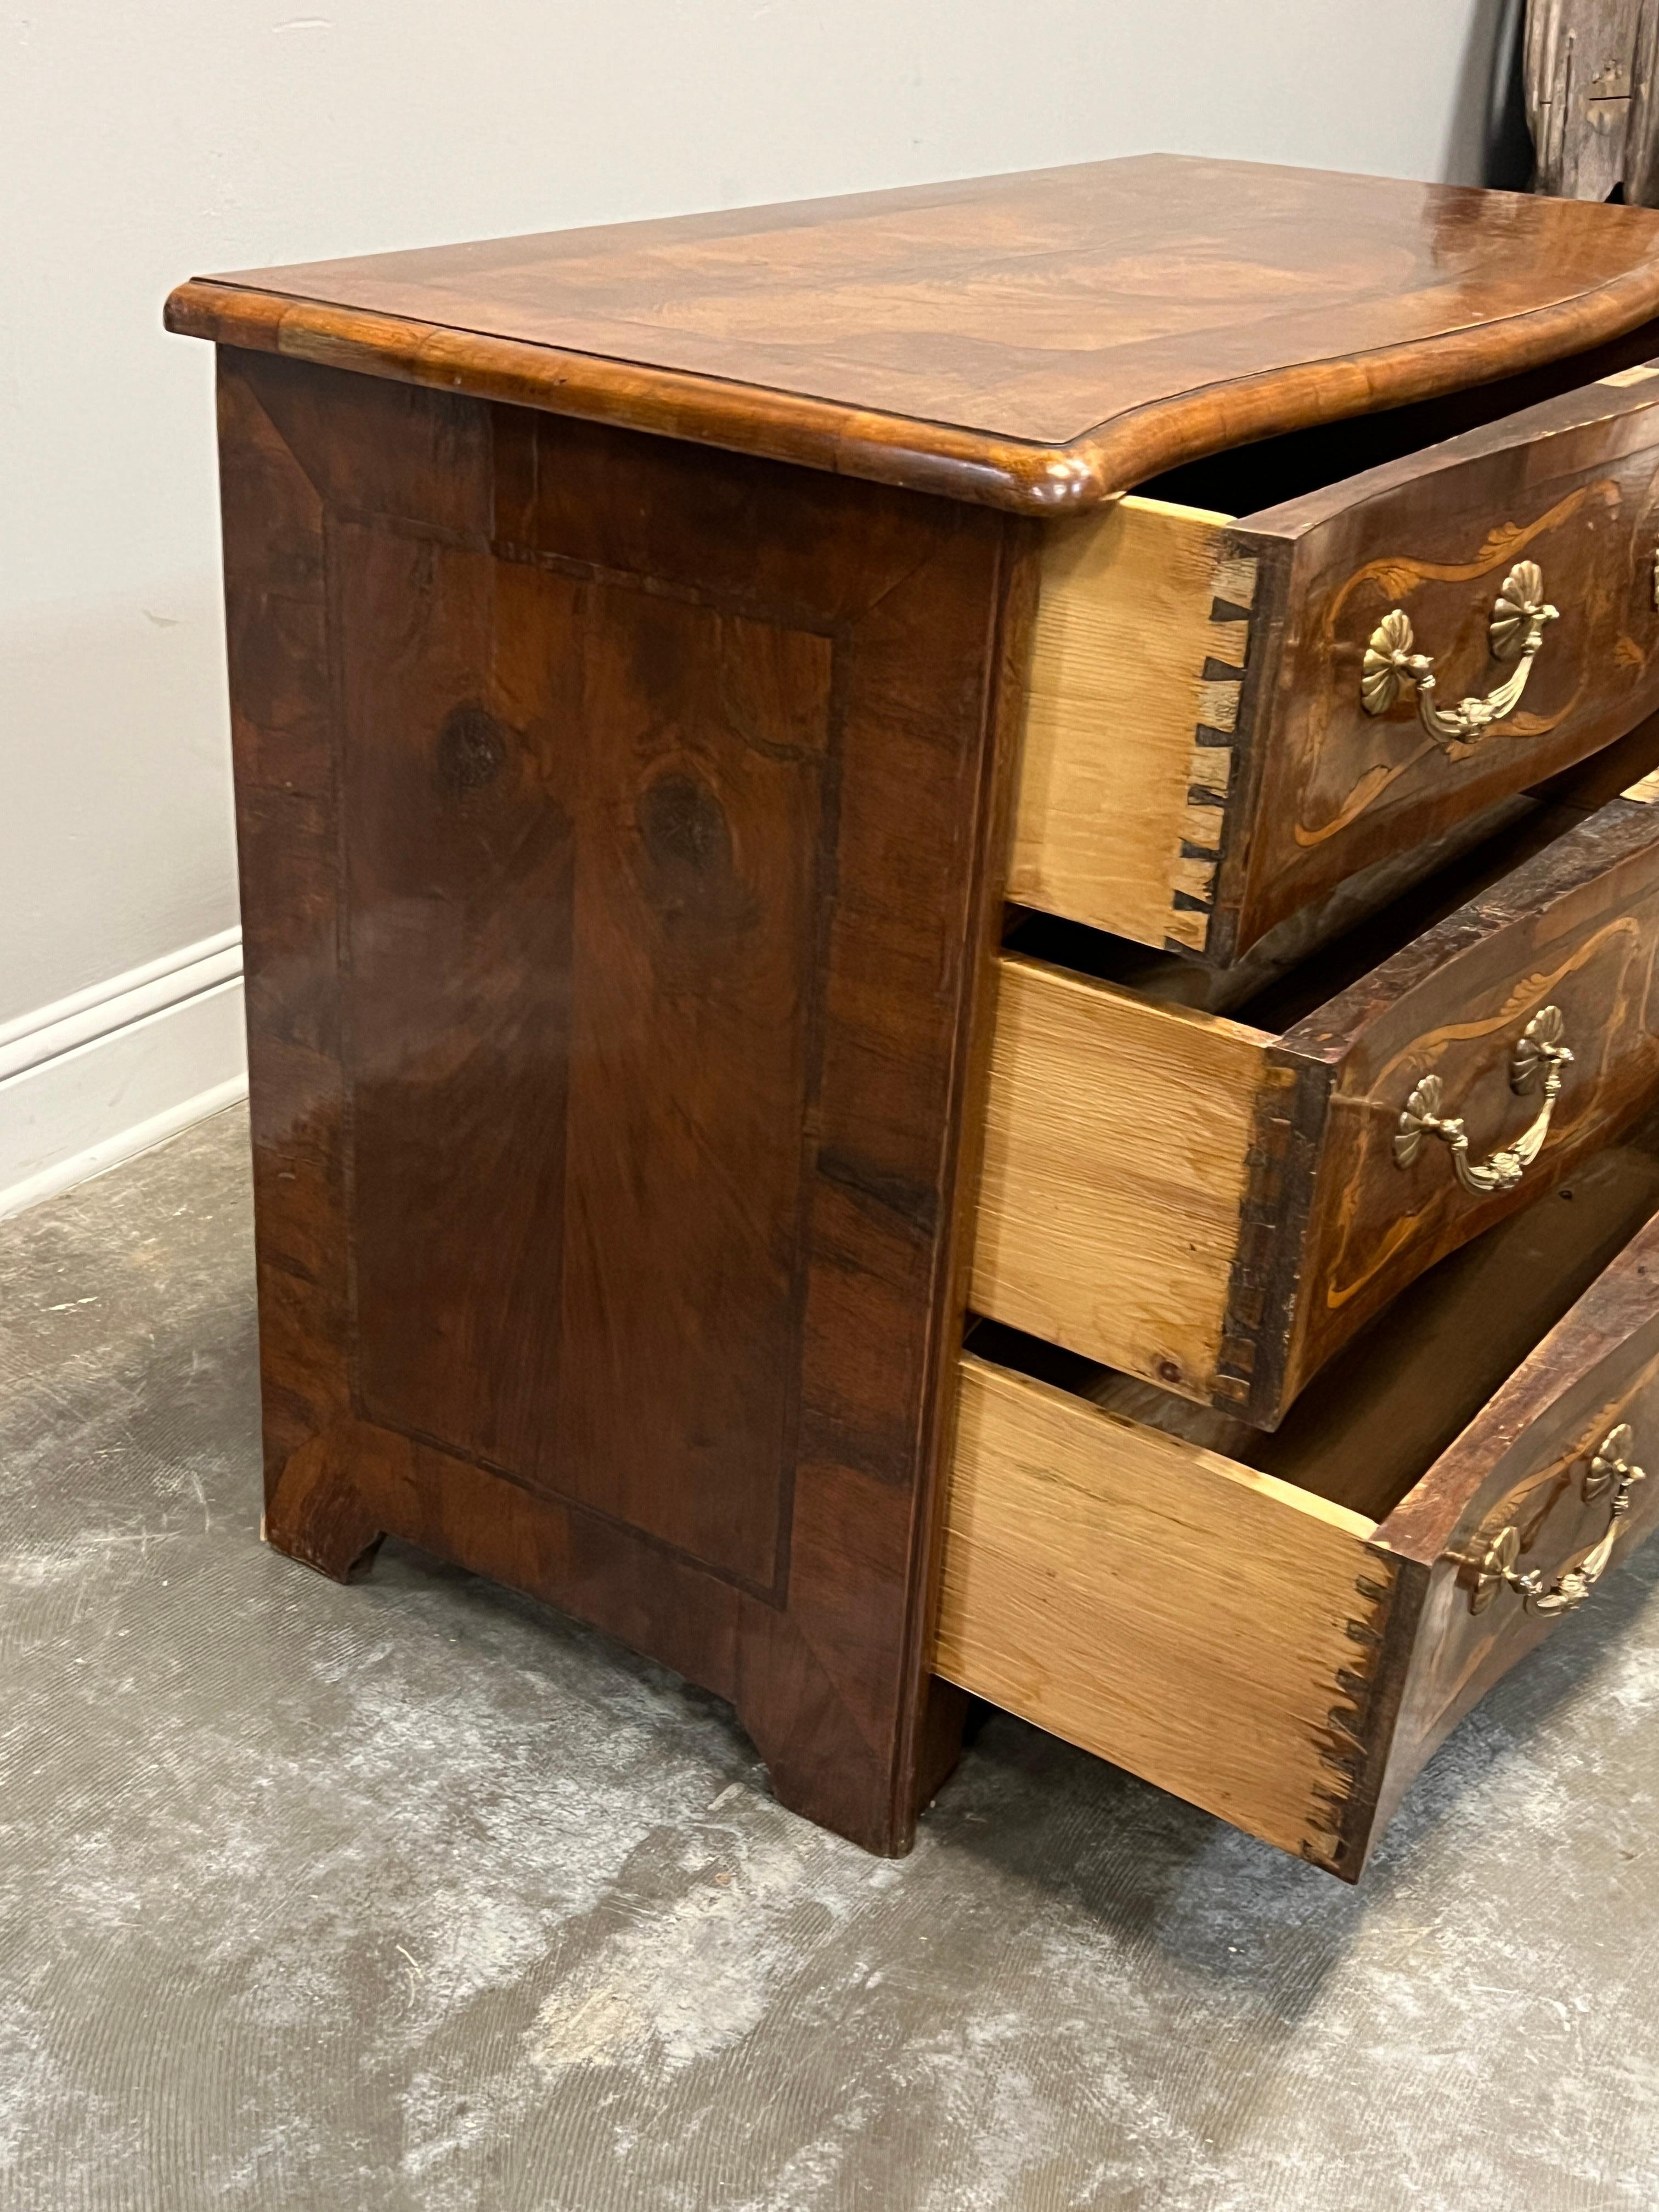 Hand-Crafted 19th Century Inlaid Marquetry Commode In Walnut For Sale